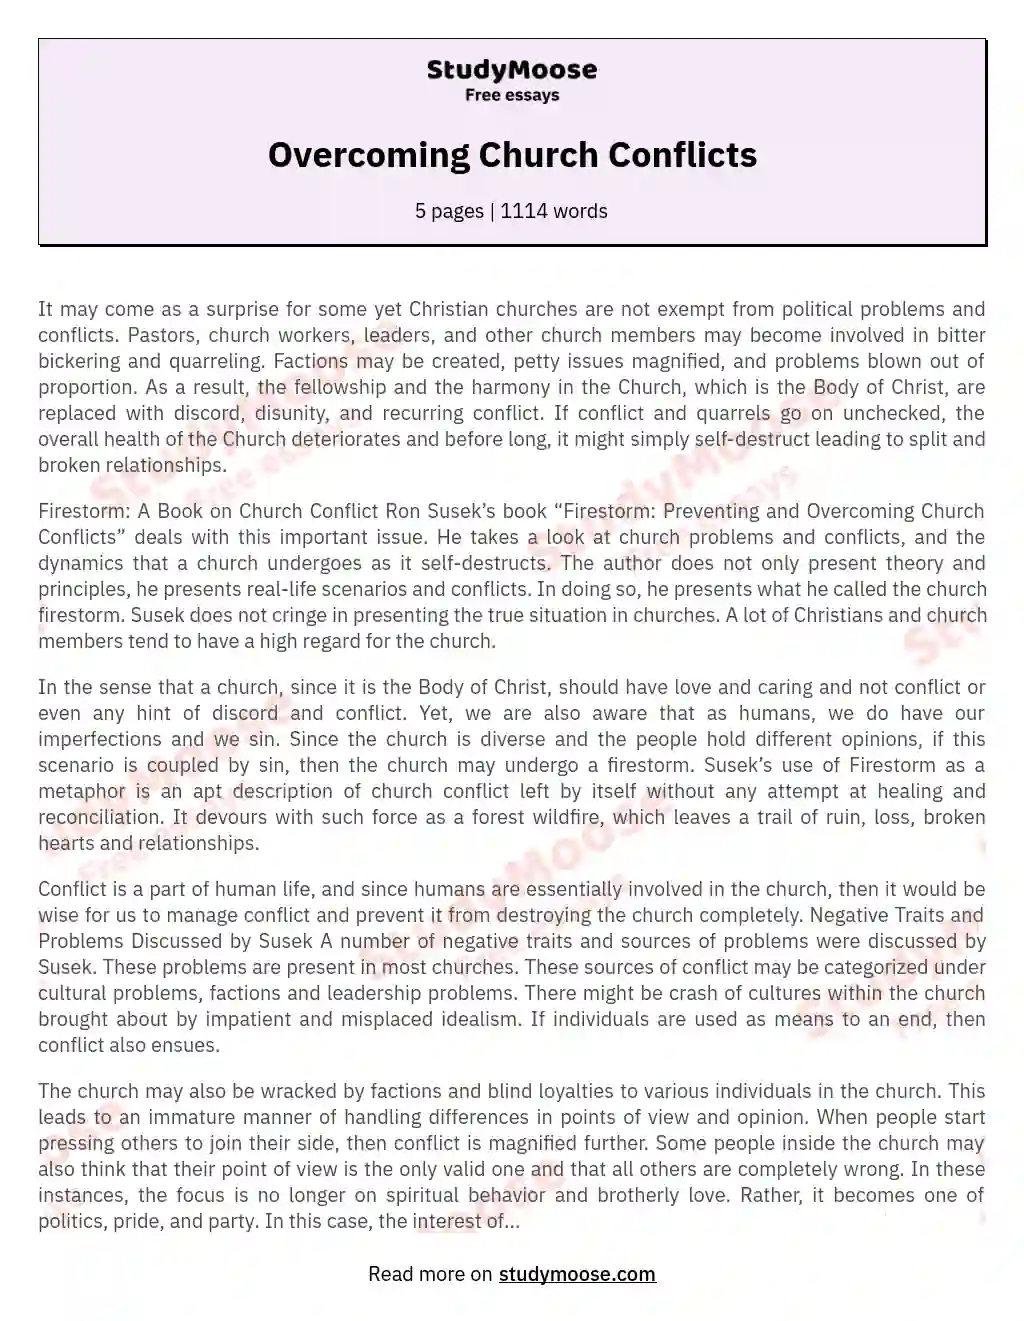 Overcoming Church Conflicts essay